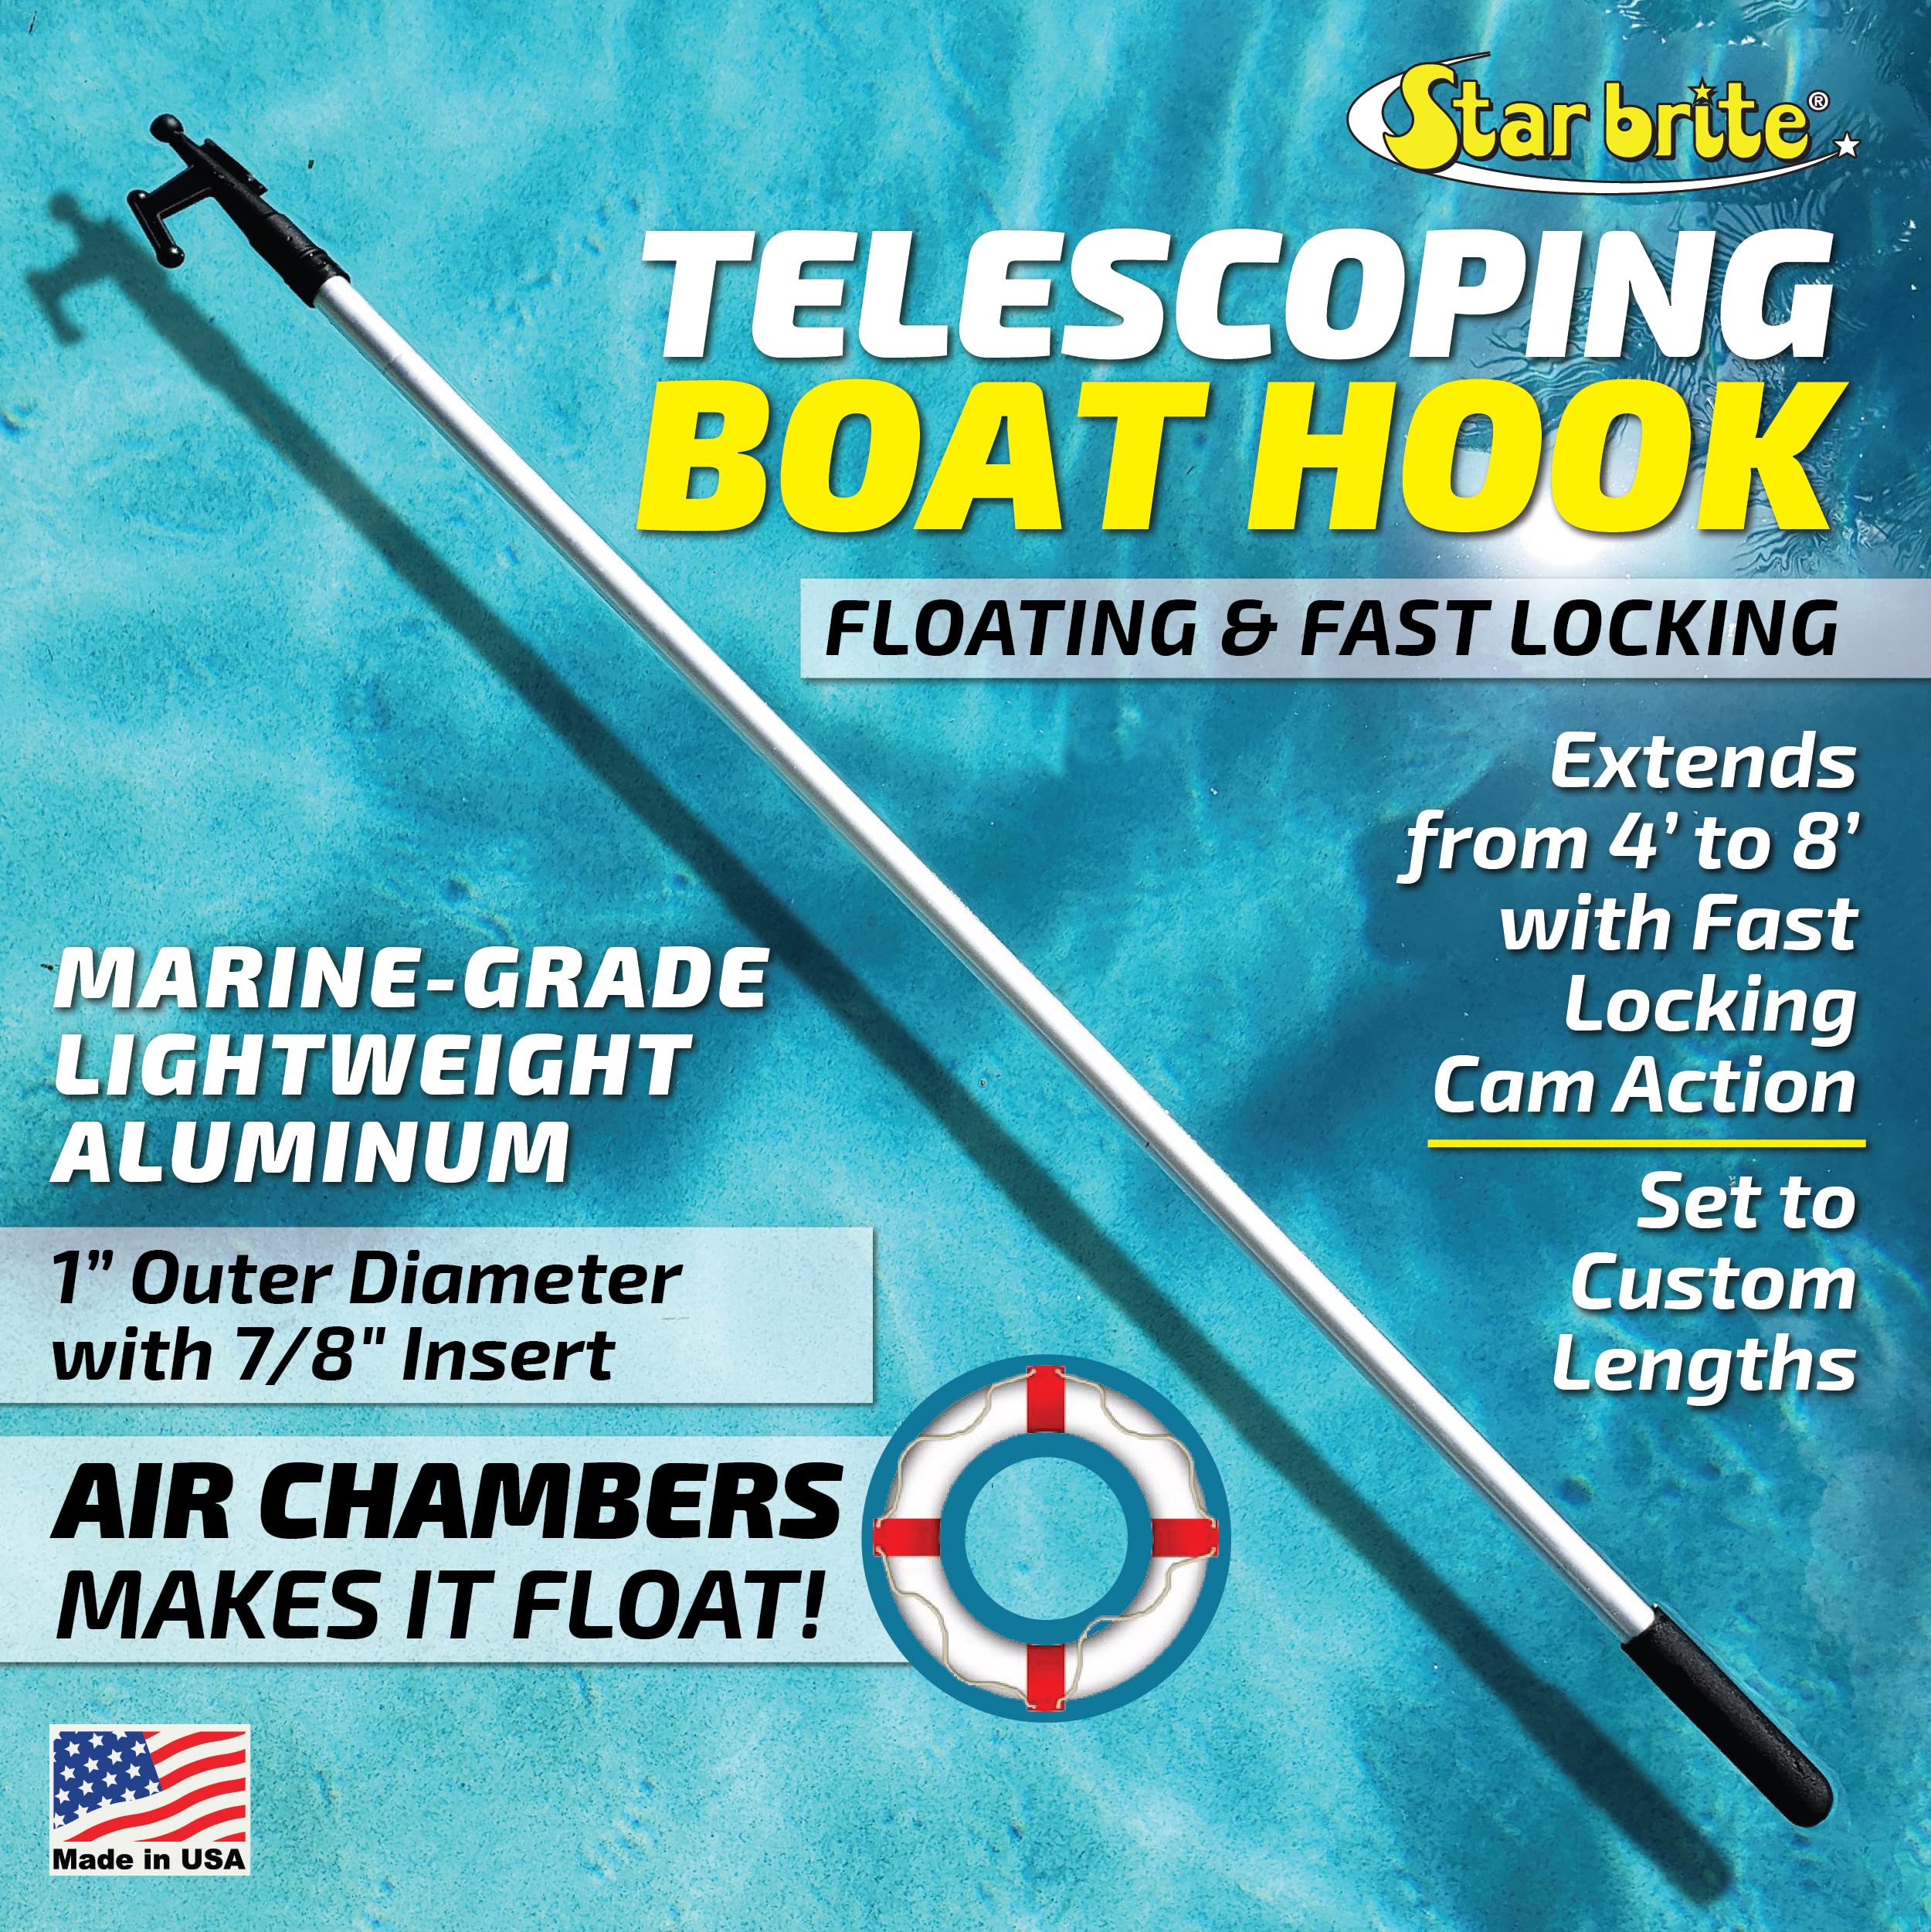 STAR BRITE Adjustable Boat Hook - Telescoping, Floating, Multi-Purpose - Extends from 4 ft. to 8 ft. - Reinforced Boat Gaff Pole - Ideal for Docking, Mooring (040609)